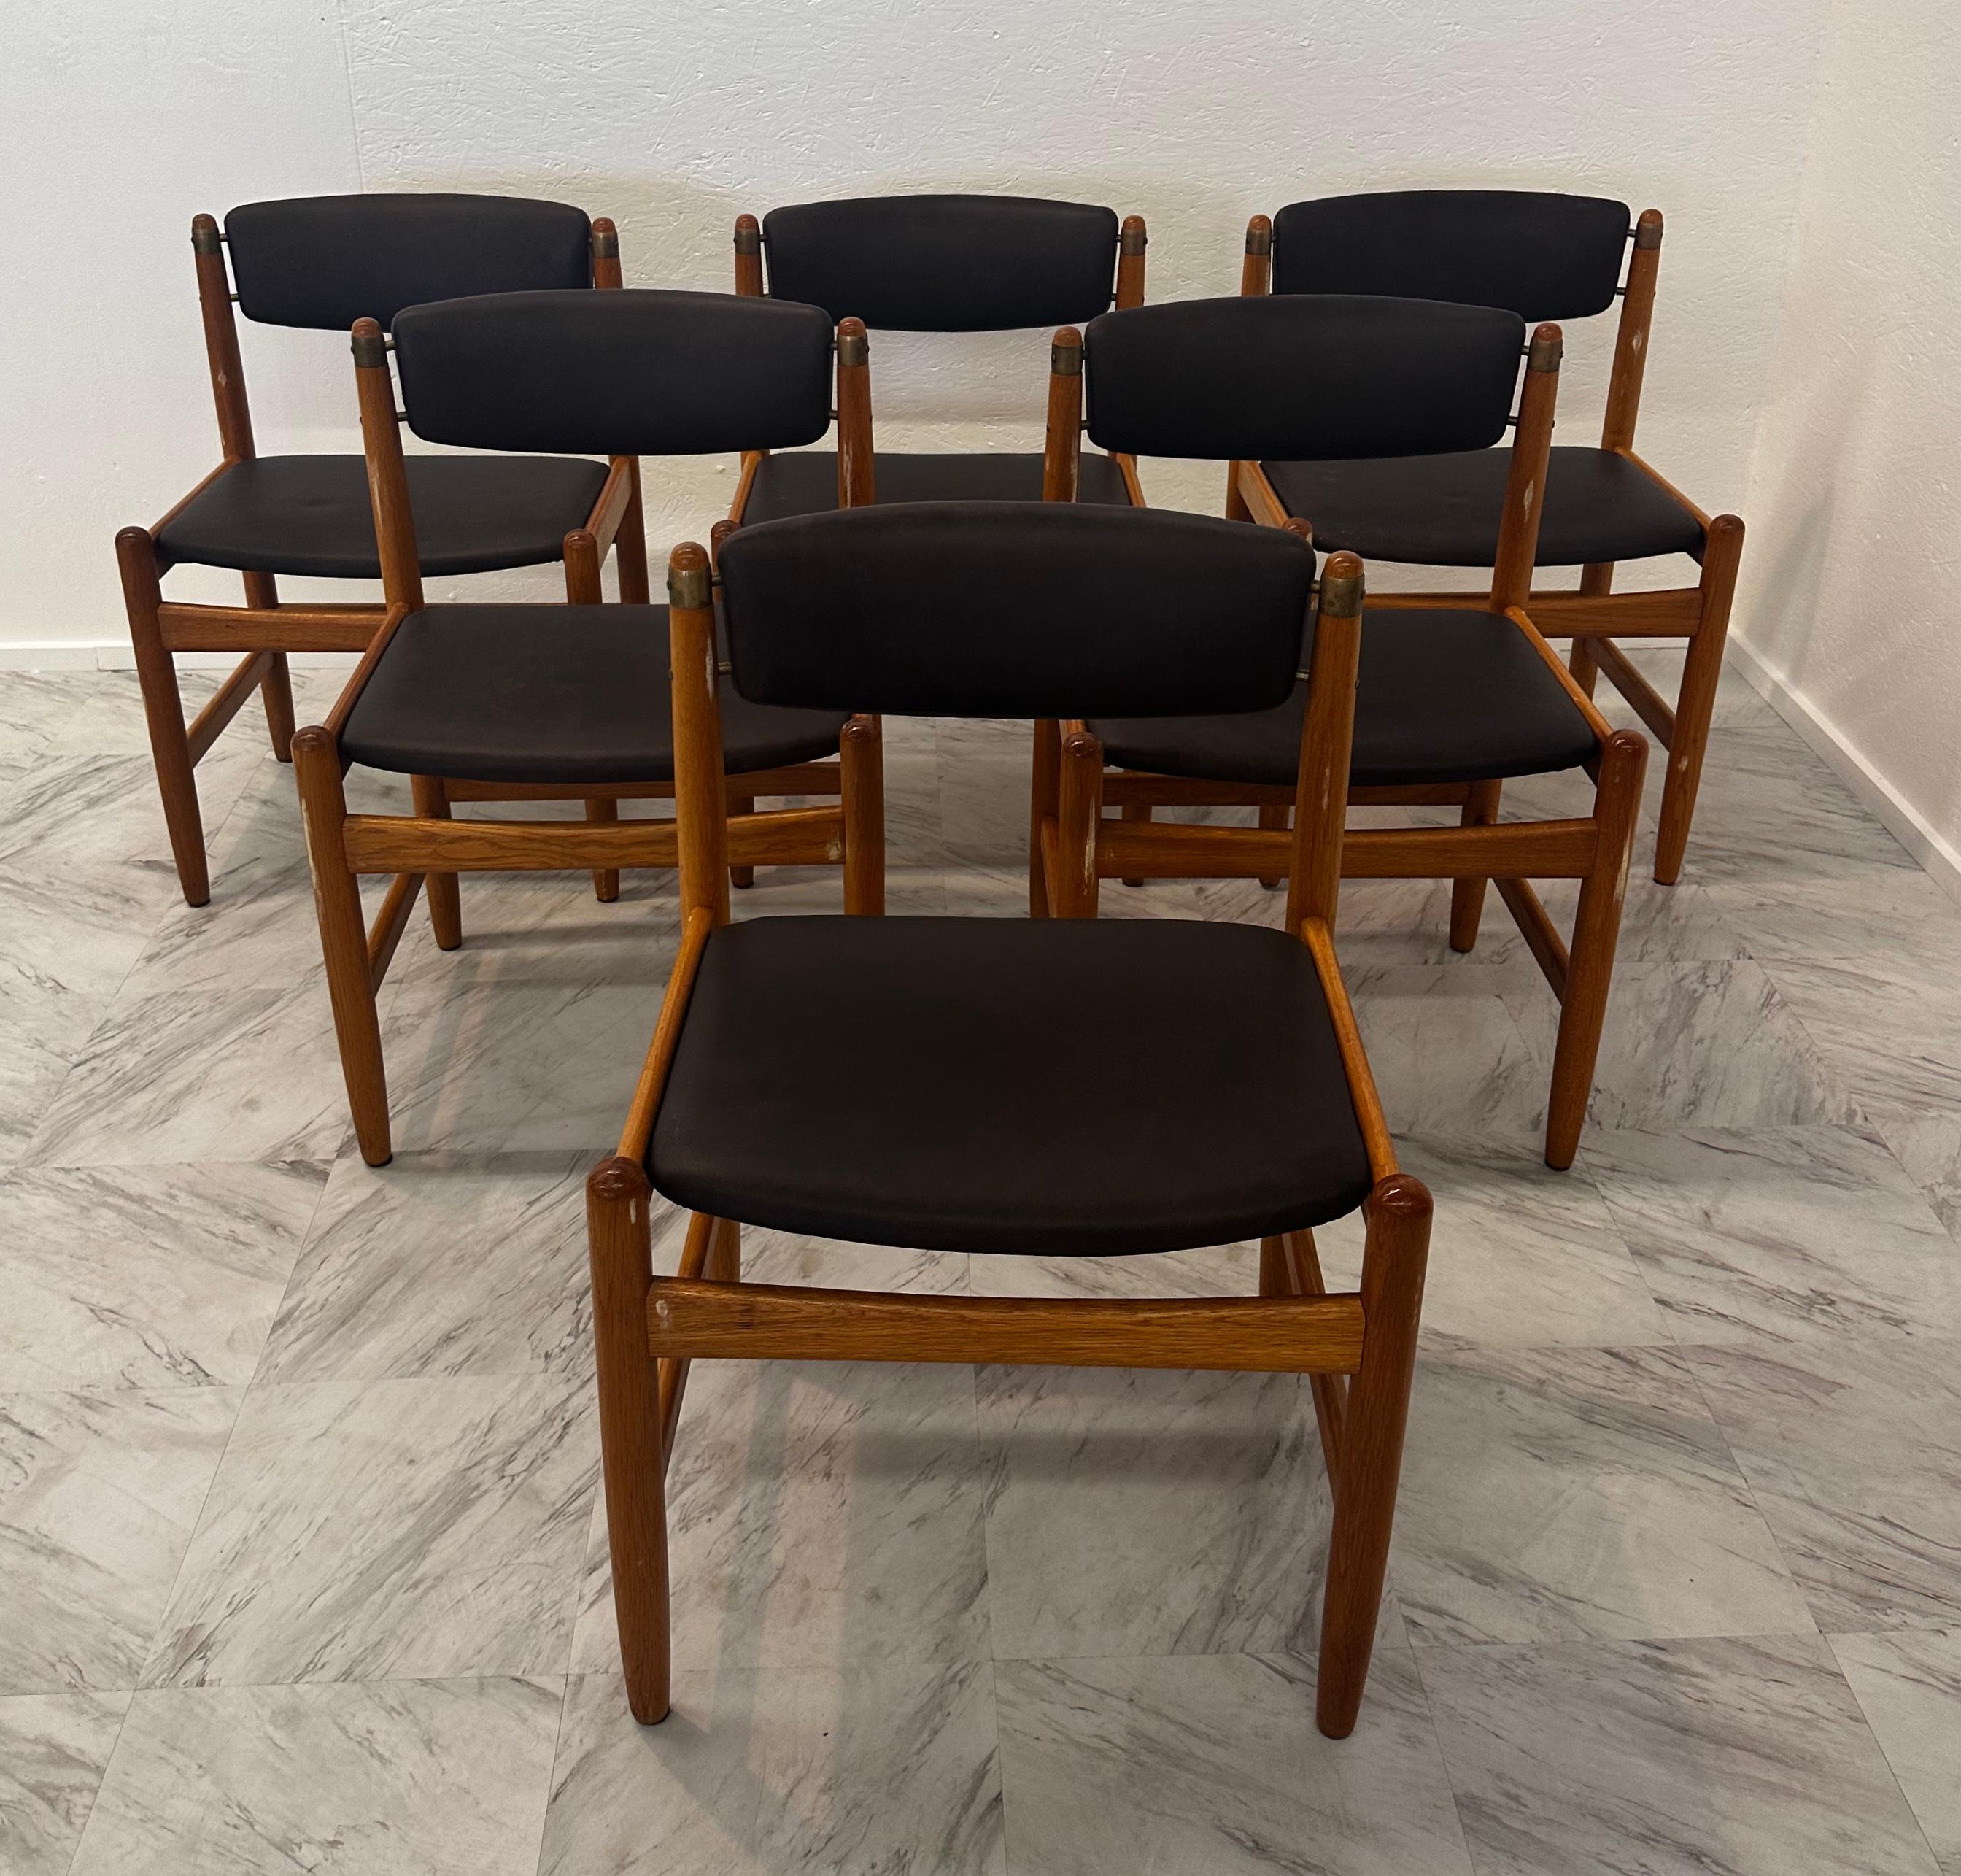 Swedish Set of 6 Oak Dining Chairs by Børge Mogensen for Karl Andersson & Söner, 1950s For Sale